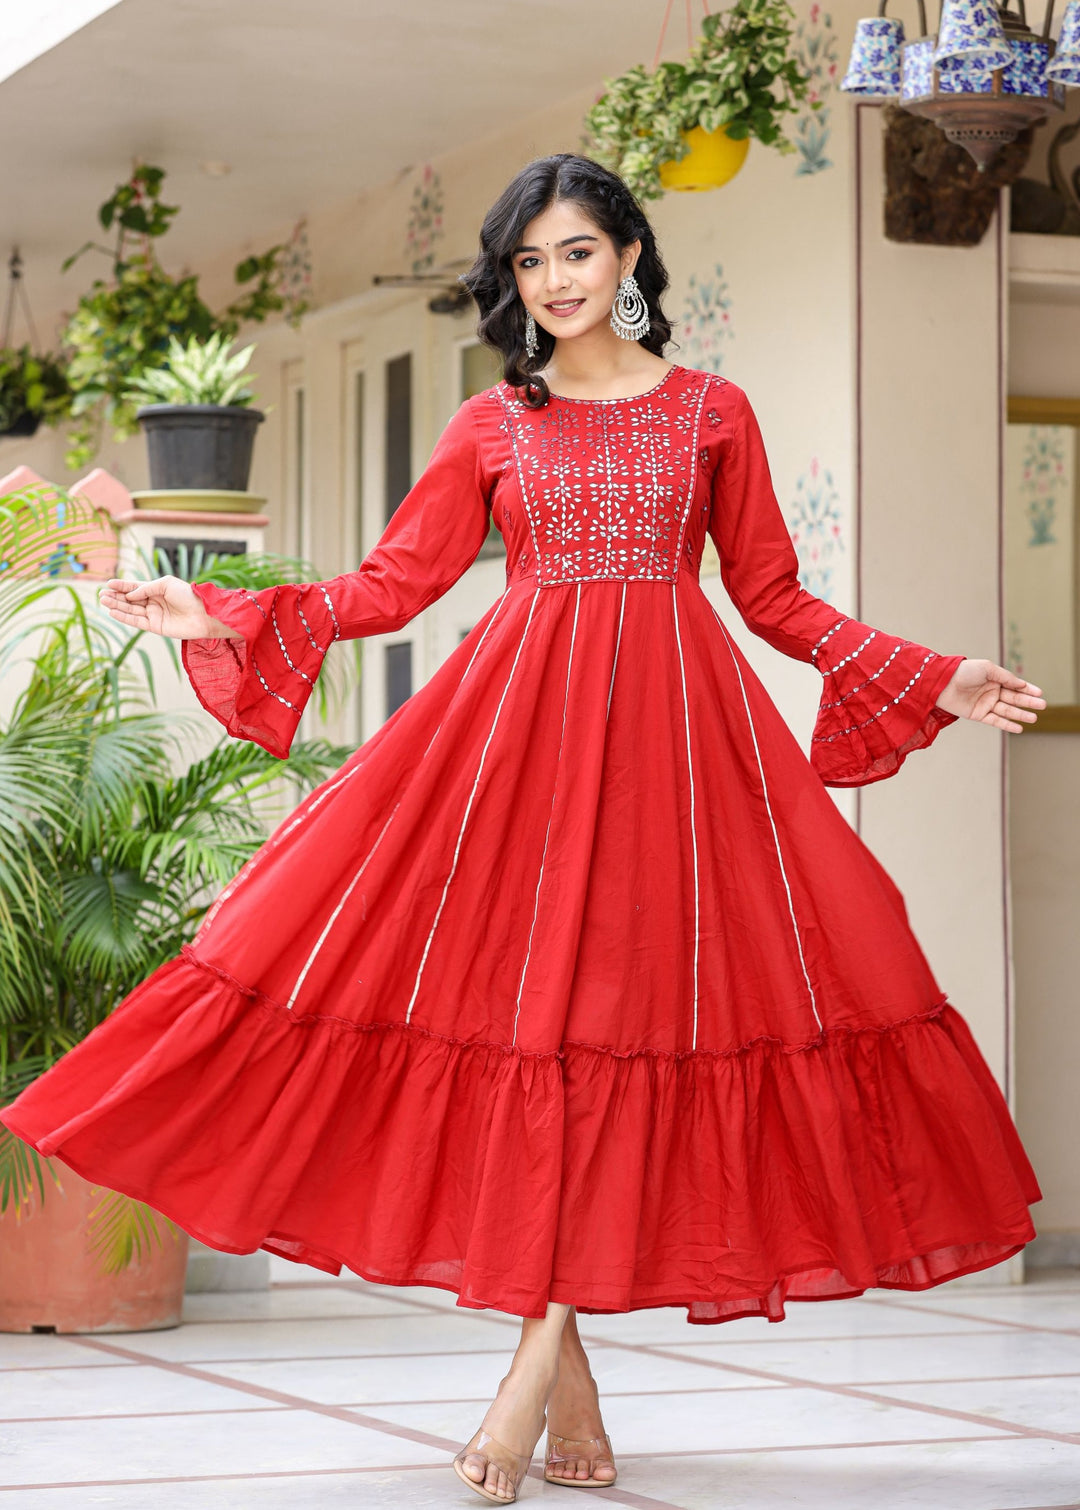 Buy a Red Ethnic Dress for Women Online | Best Party Wear Ethnic Gown in India